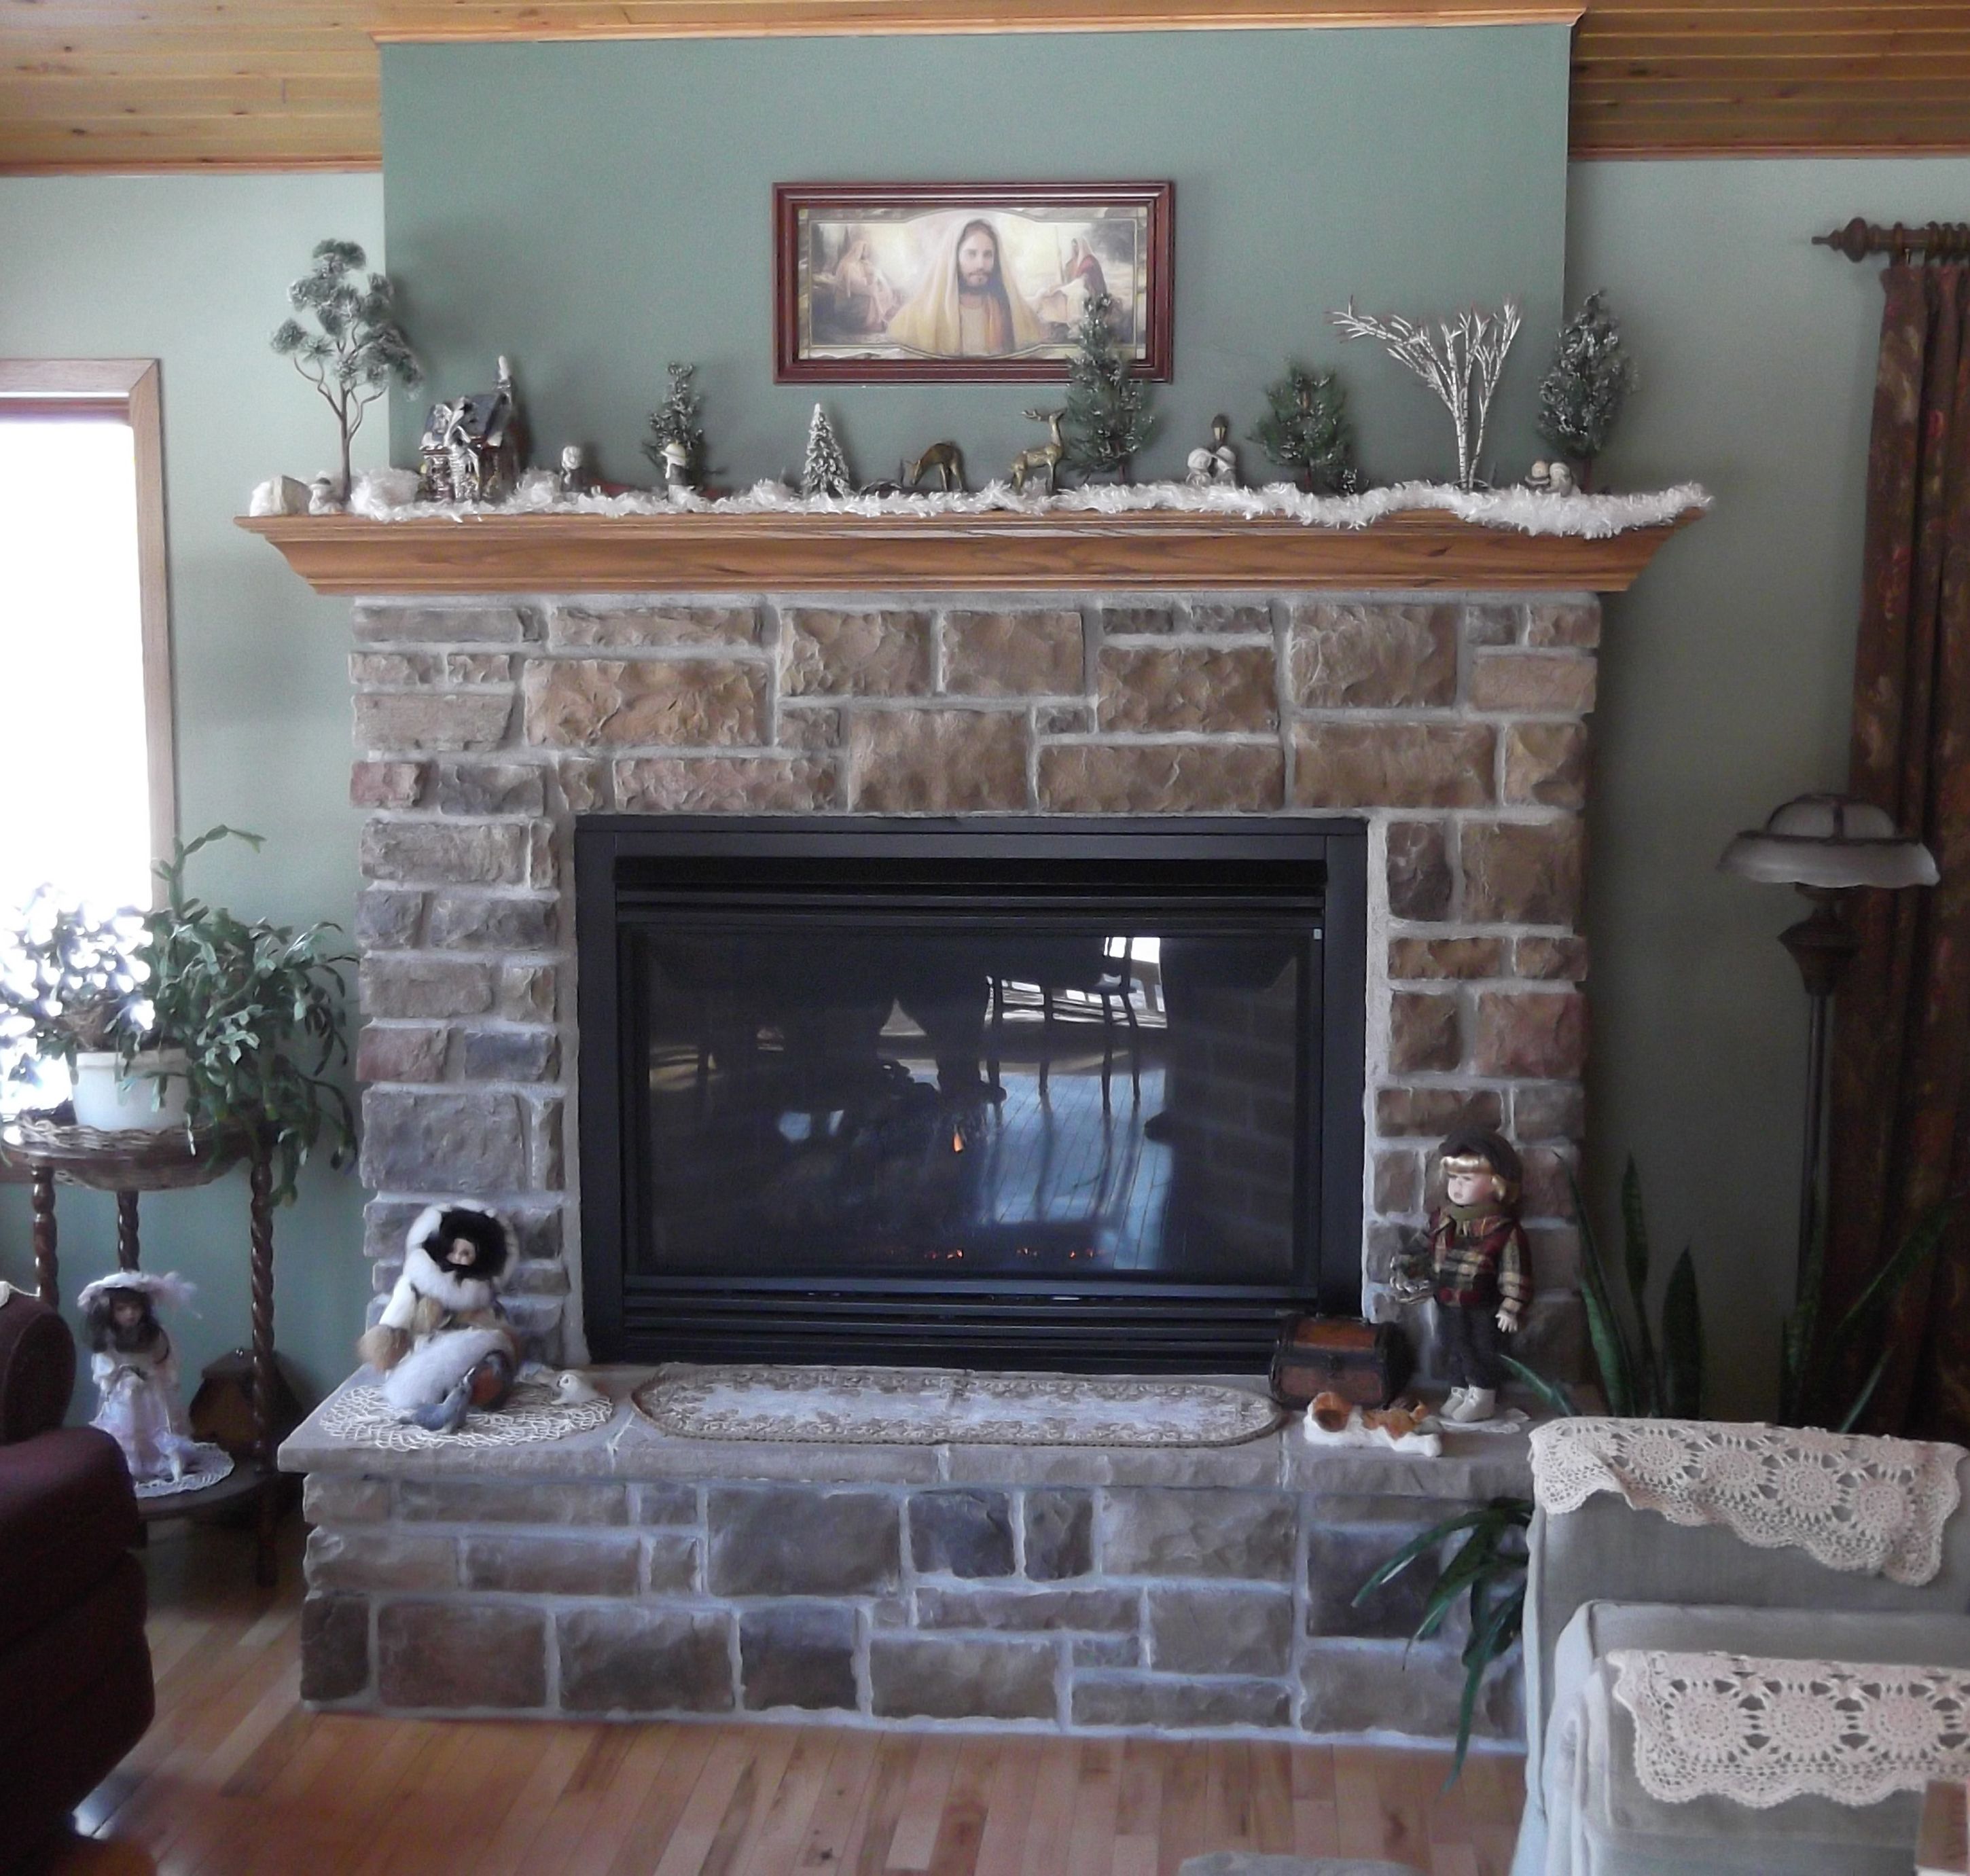 Luxury Brown Fireplace Mantel Design Inspiration With Silver Ornaments Brown Brick Fireplace Wall And Black Fireplace Nice Fireplace Mantel Design Inspiration (View 35 of 123)